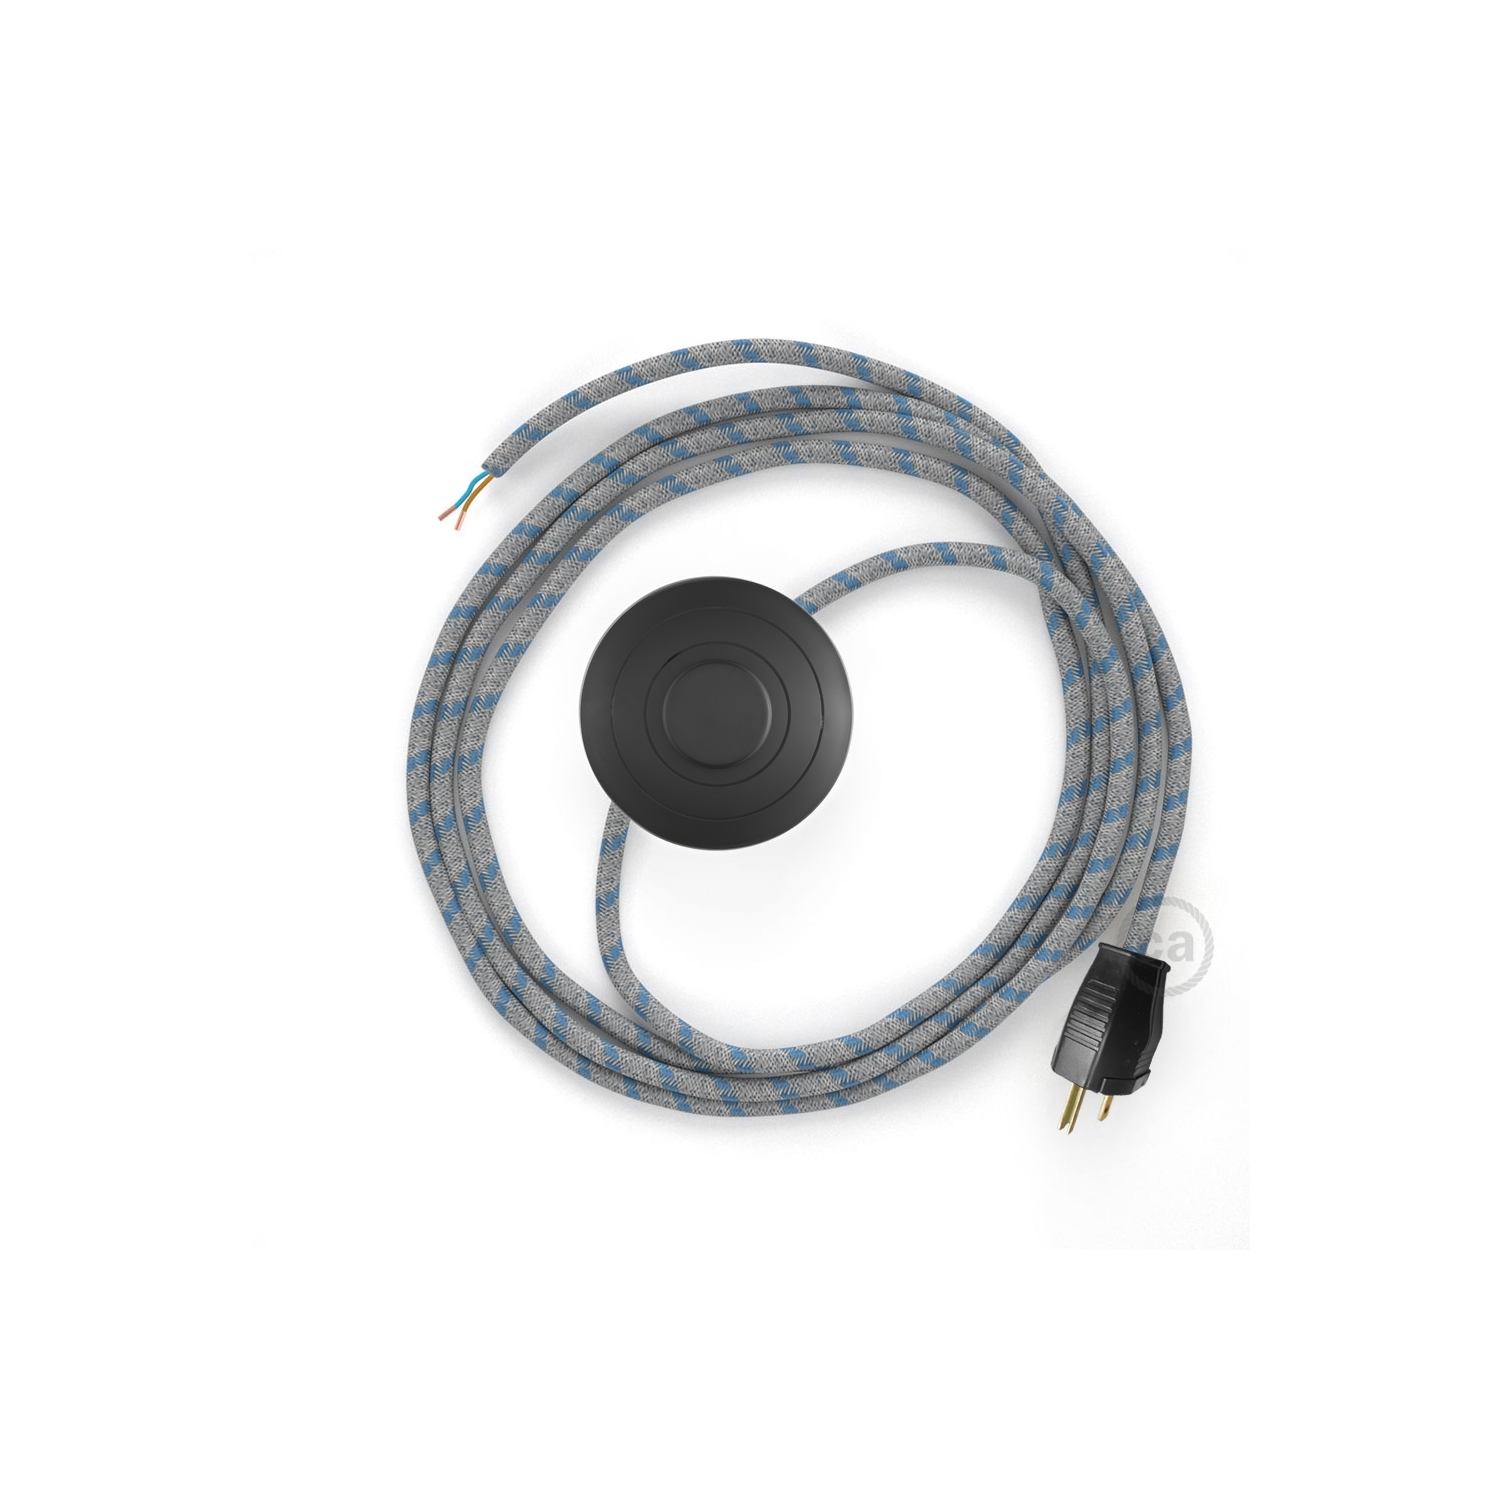 Power Cord with foot switch, RD55 Natural & Blue Linen Stripe - Choose color of switch/plug